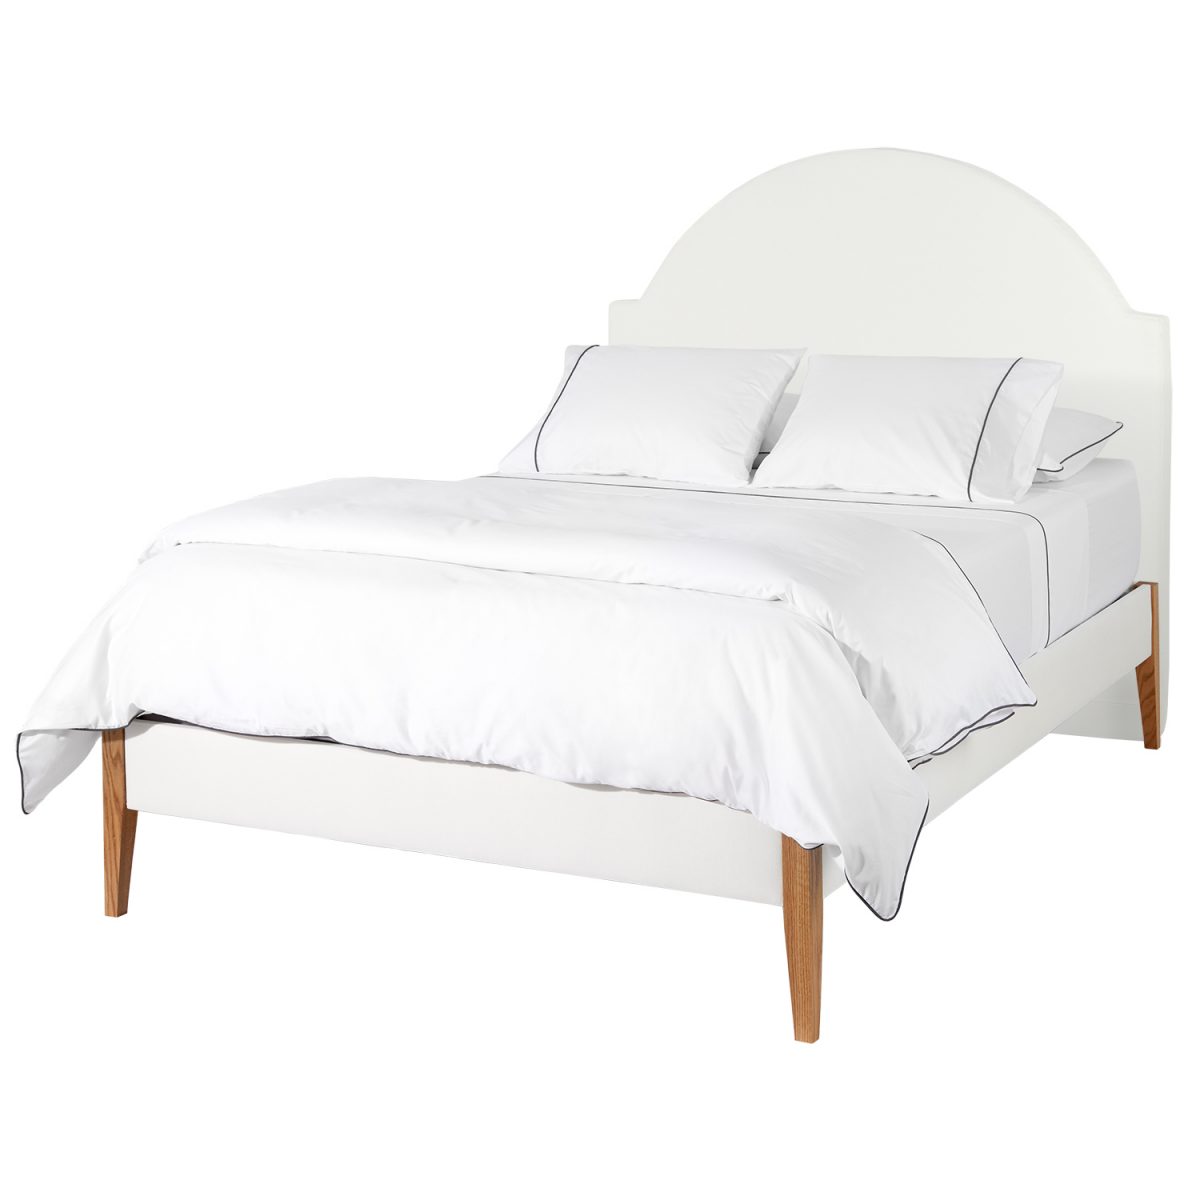 E-commerce product photography of Coley Home bedding